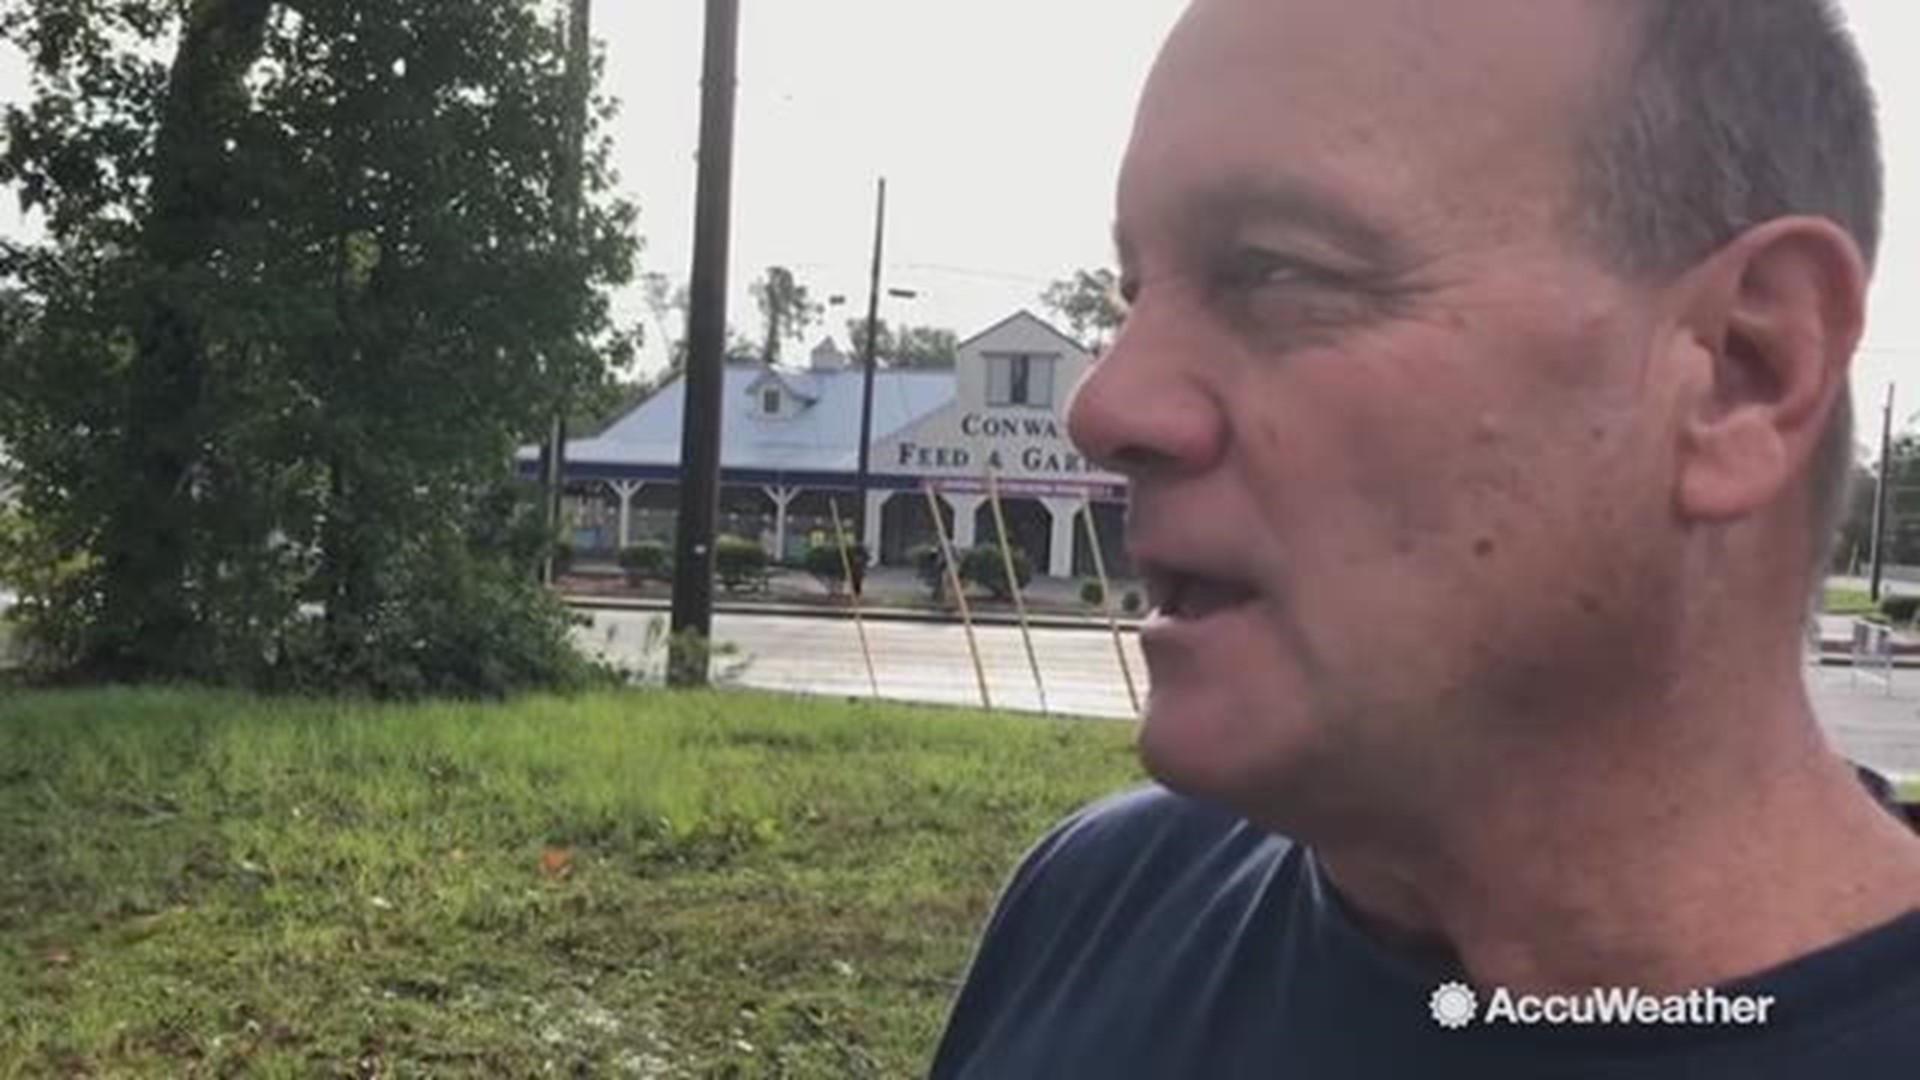 Florence has caused major flooding that closed roads and inundated building, but heros continue to emerge to help their neighbors in need.